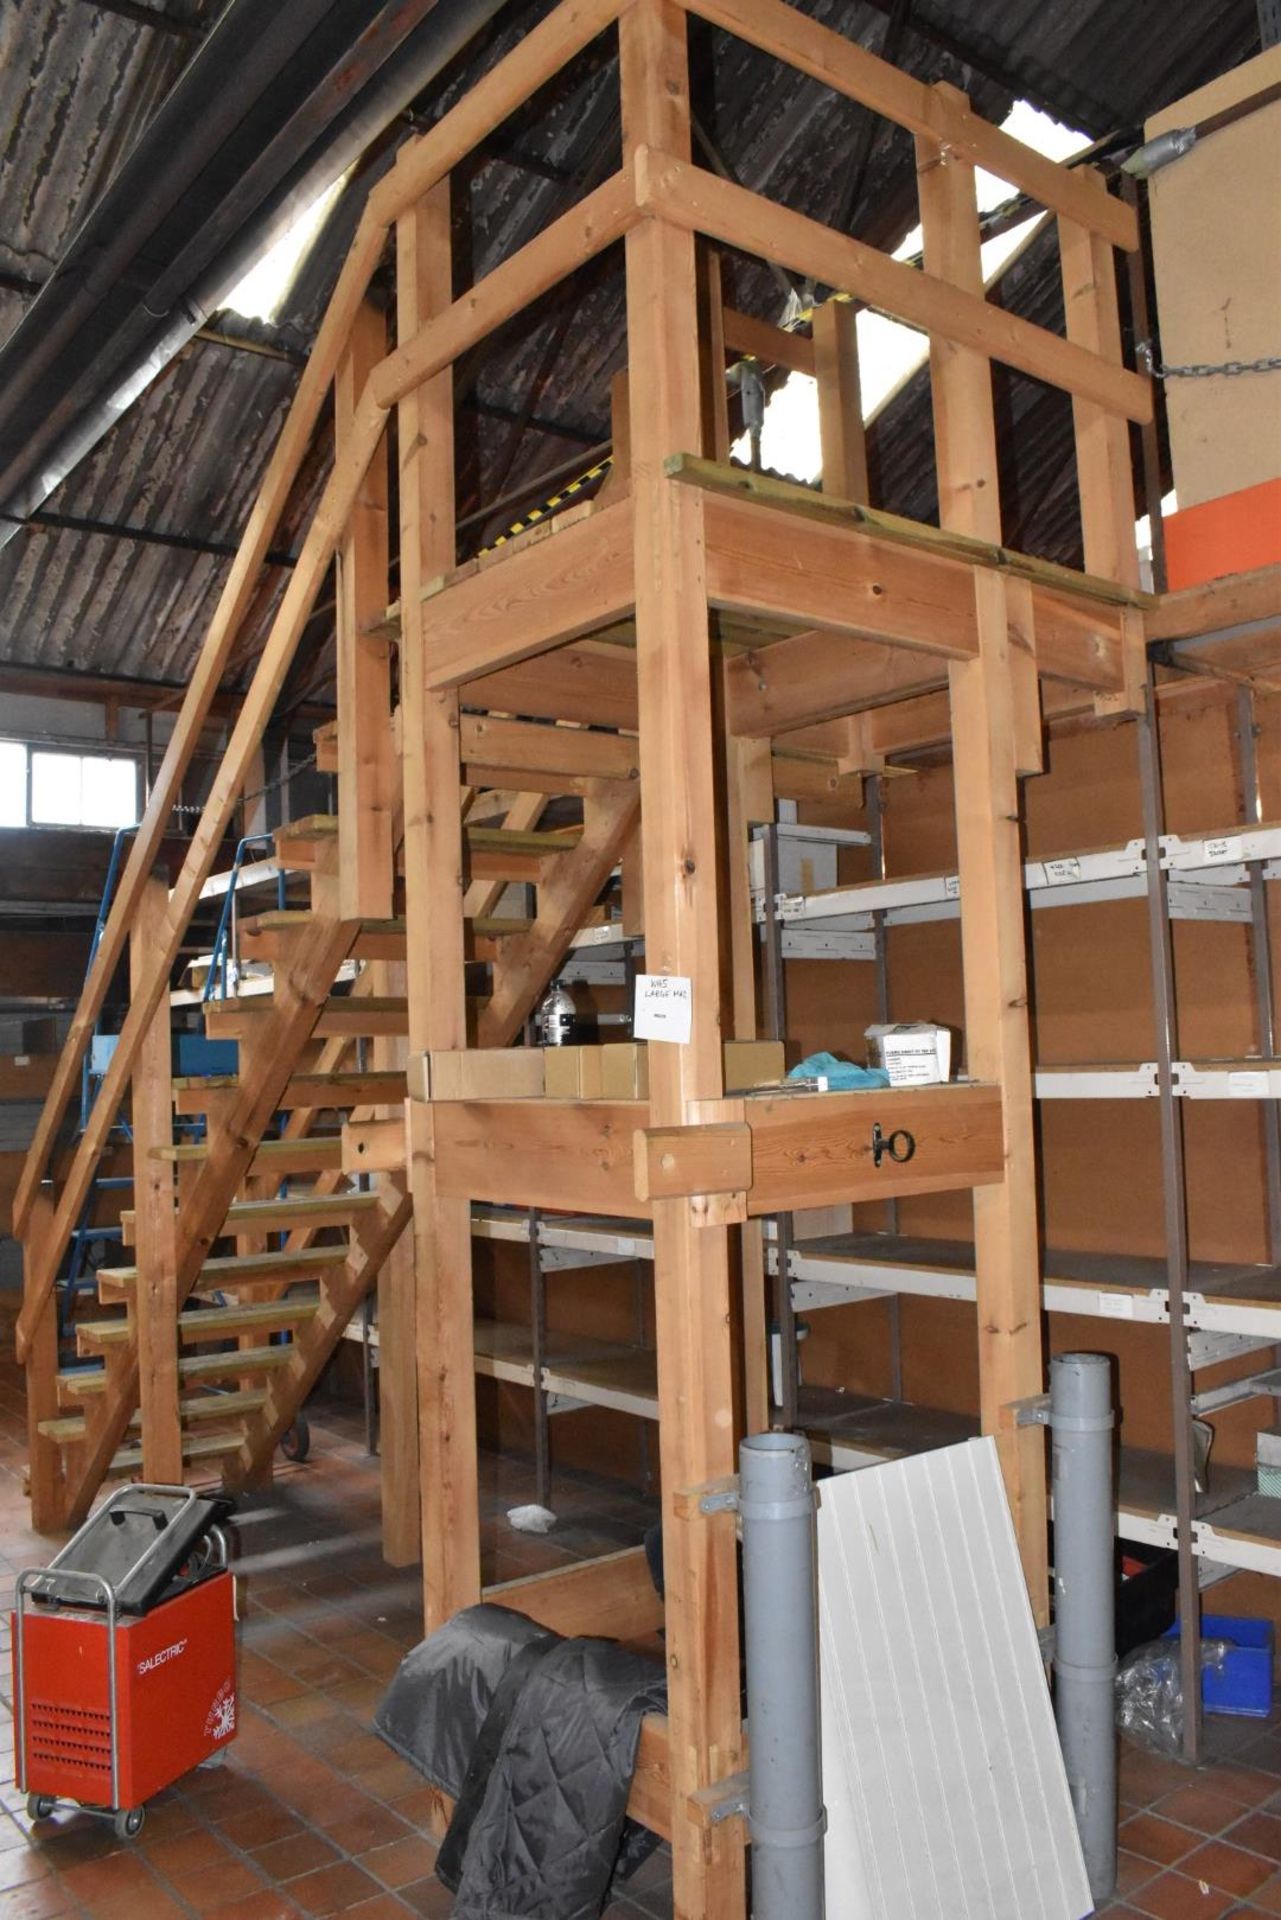 1 x Mezzanine Floor Over a Large Collection of Shelving With Timber Staircase - Size: 3m x 12m x 9m - Image 25 of 38